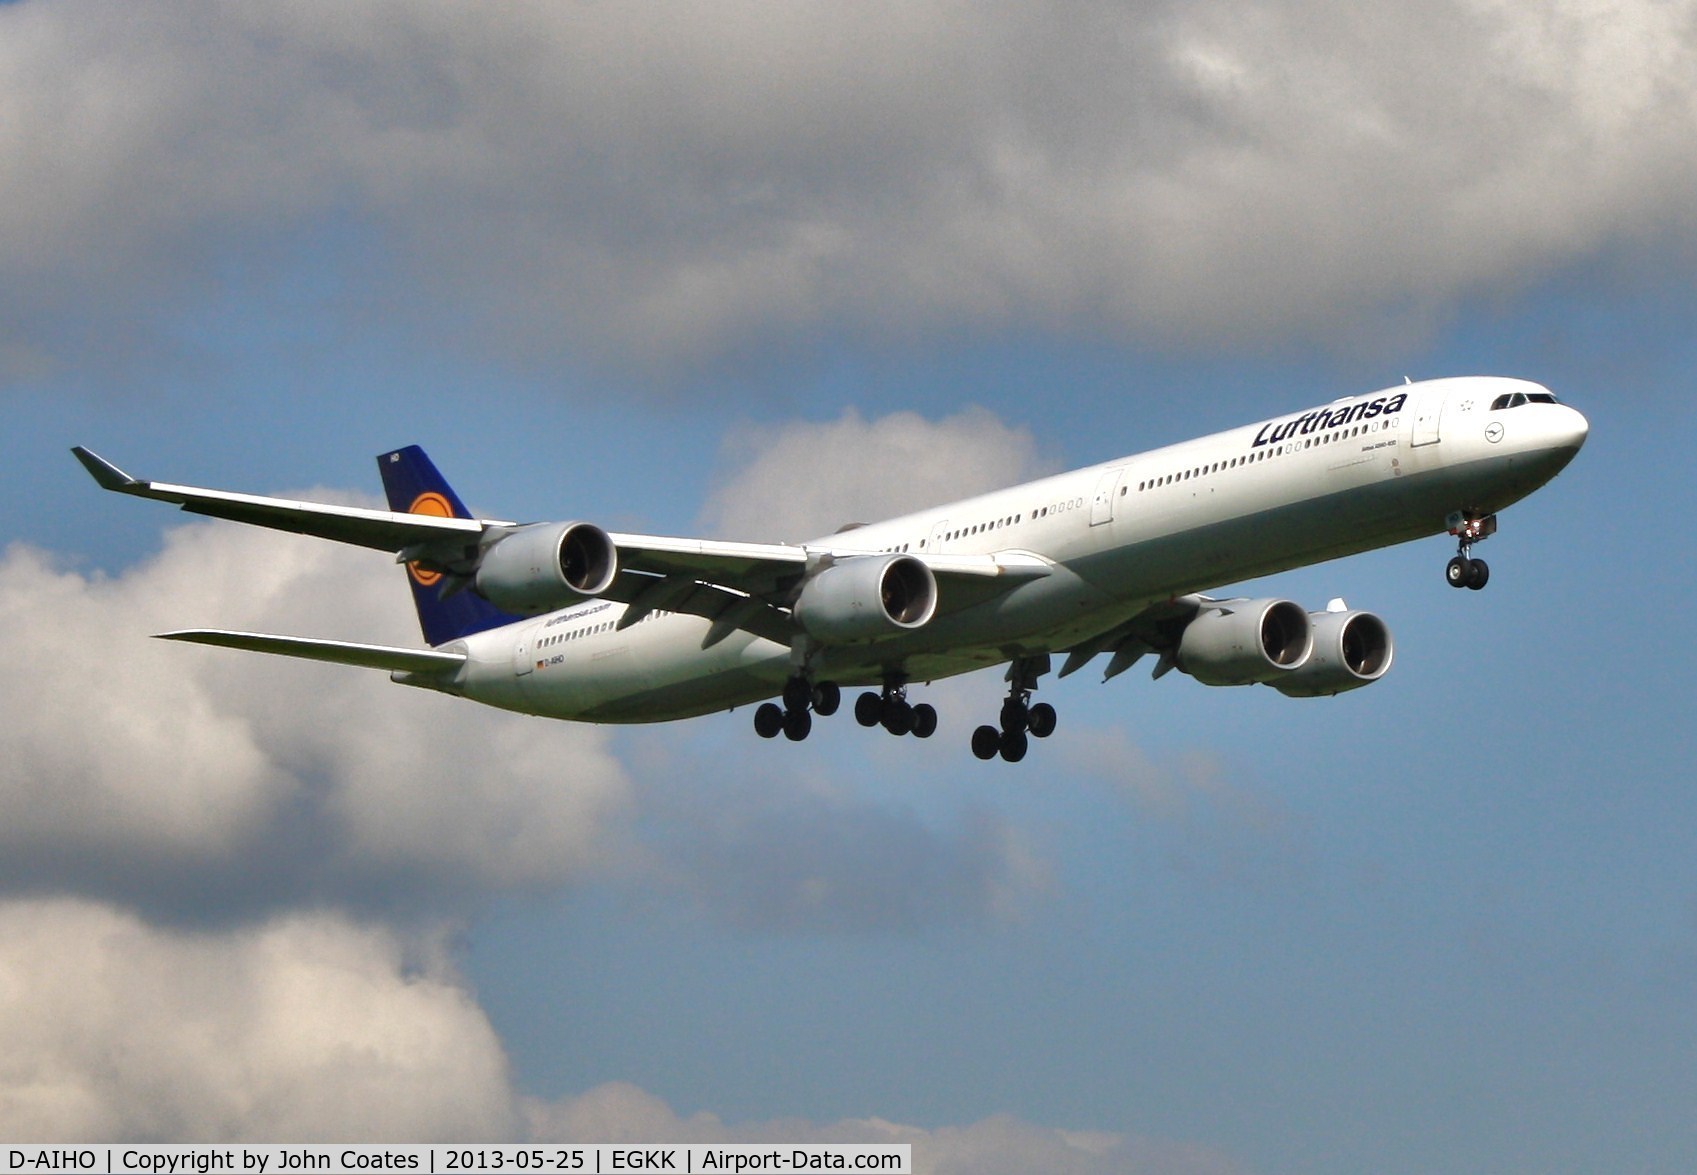 D-AIHO, 2006 Airbus A340-642 C/N 767, On approach to 08R